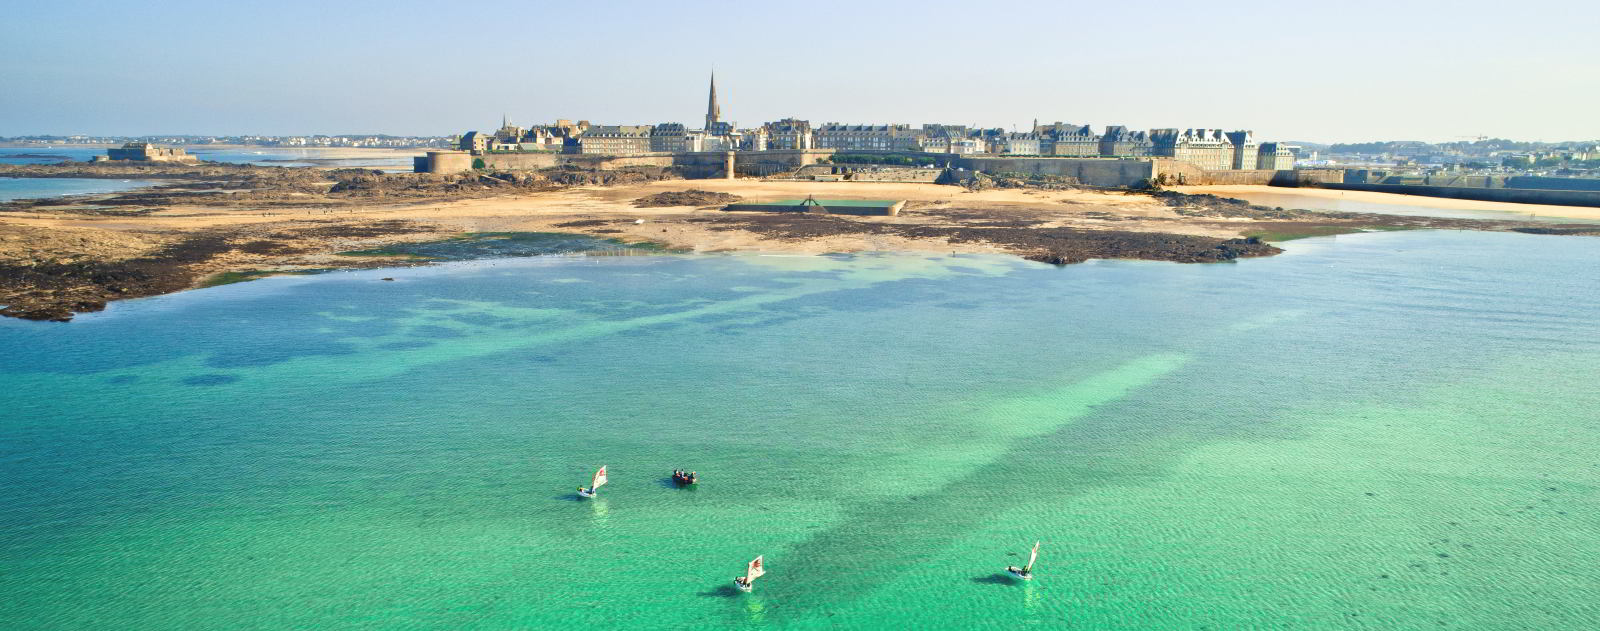 France Brittany Saint-Malo Tailormade Luxury Holidays with In-Luxe Travel France, The luxury bespoke holidays in France specialist since 2007